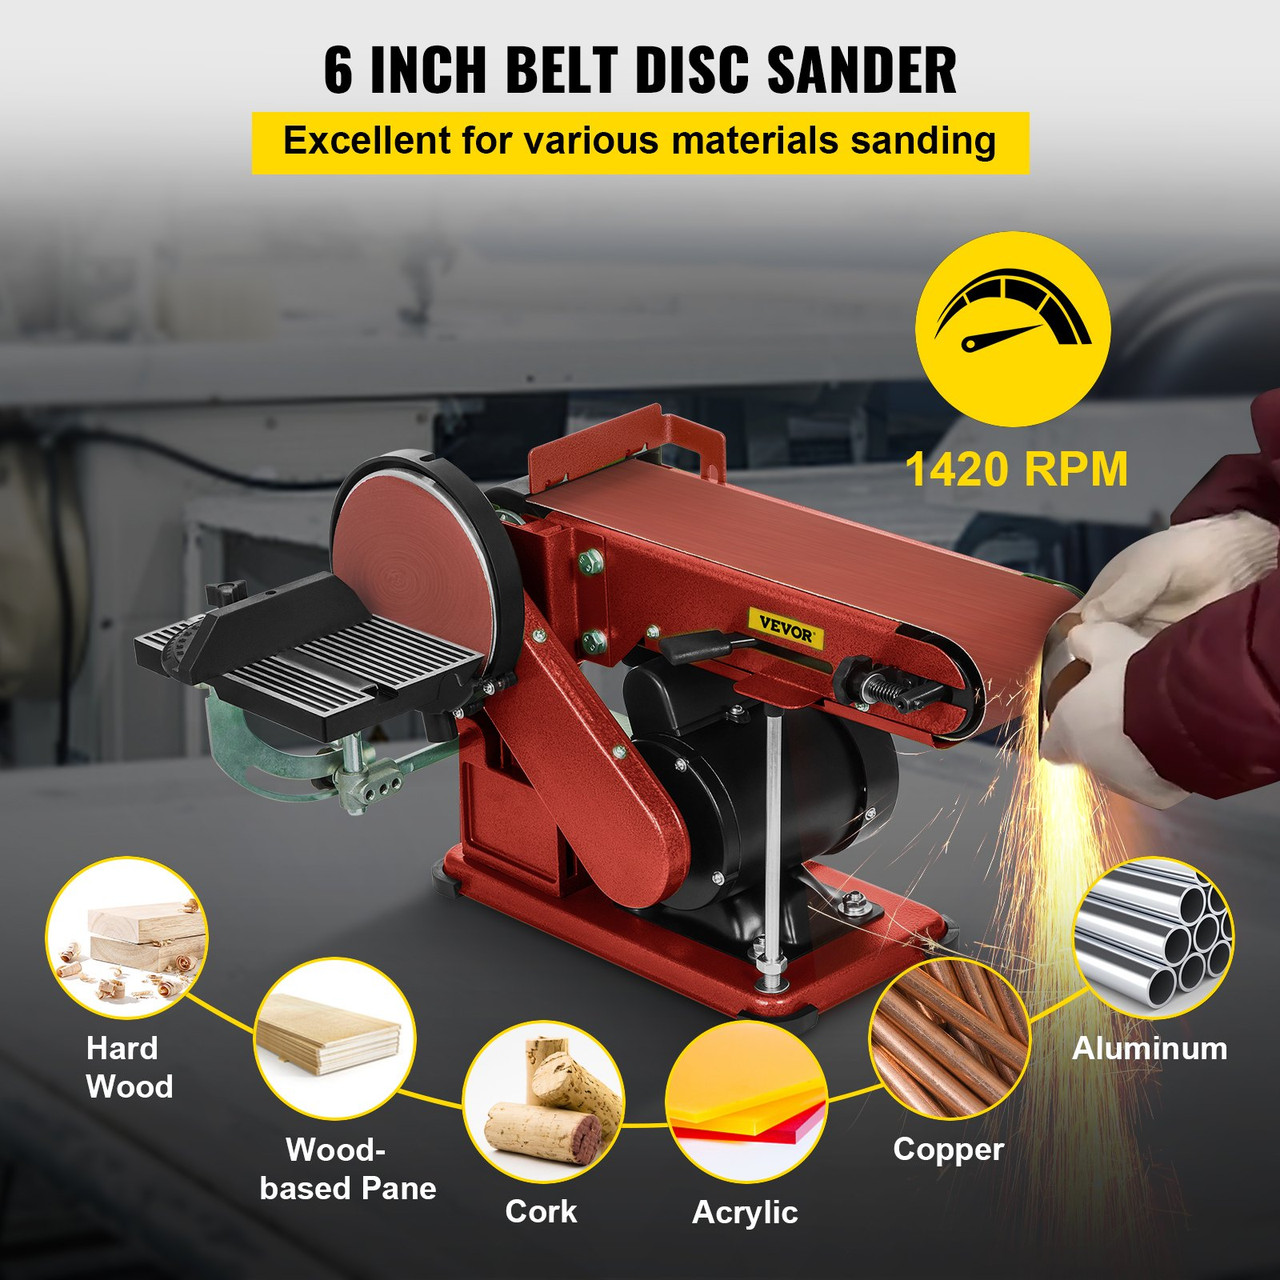 Belt Disc Sander 4x36inch and 6inch Disc, Benchtop Disc Sander 375W,Disc Combo Sander with Built-In Dust Collection,Bench Sander for Woodworking